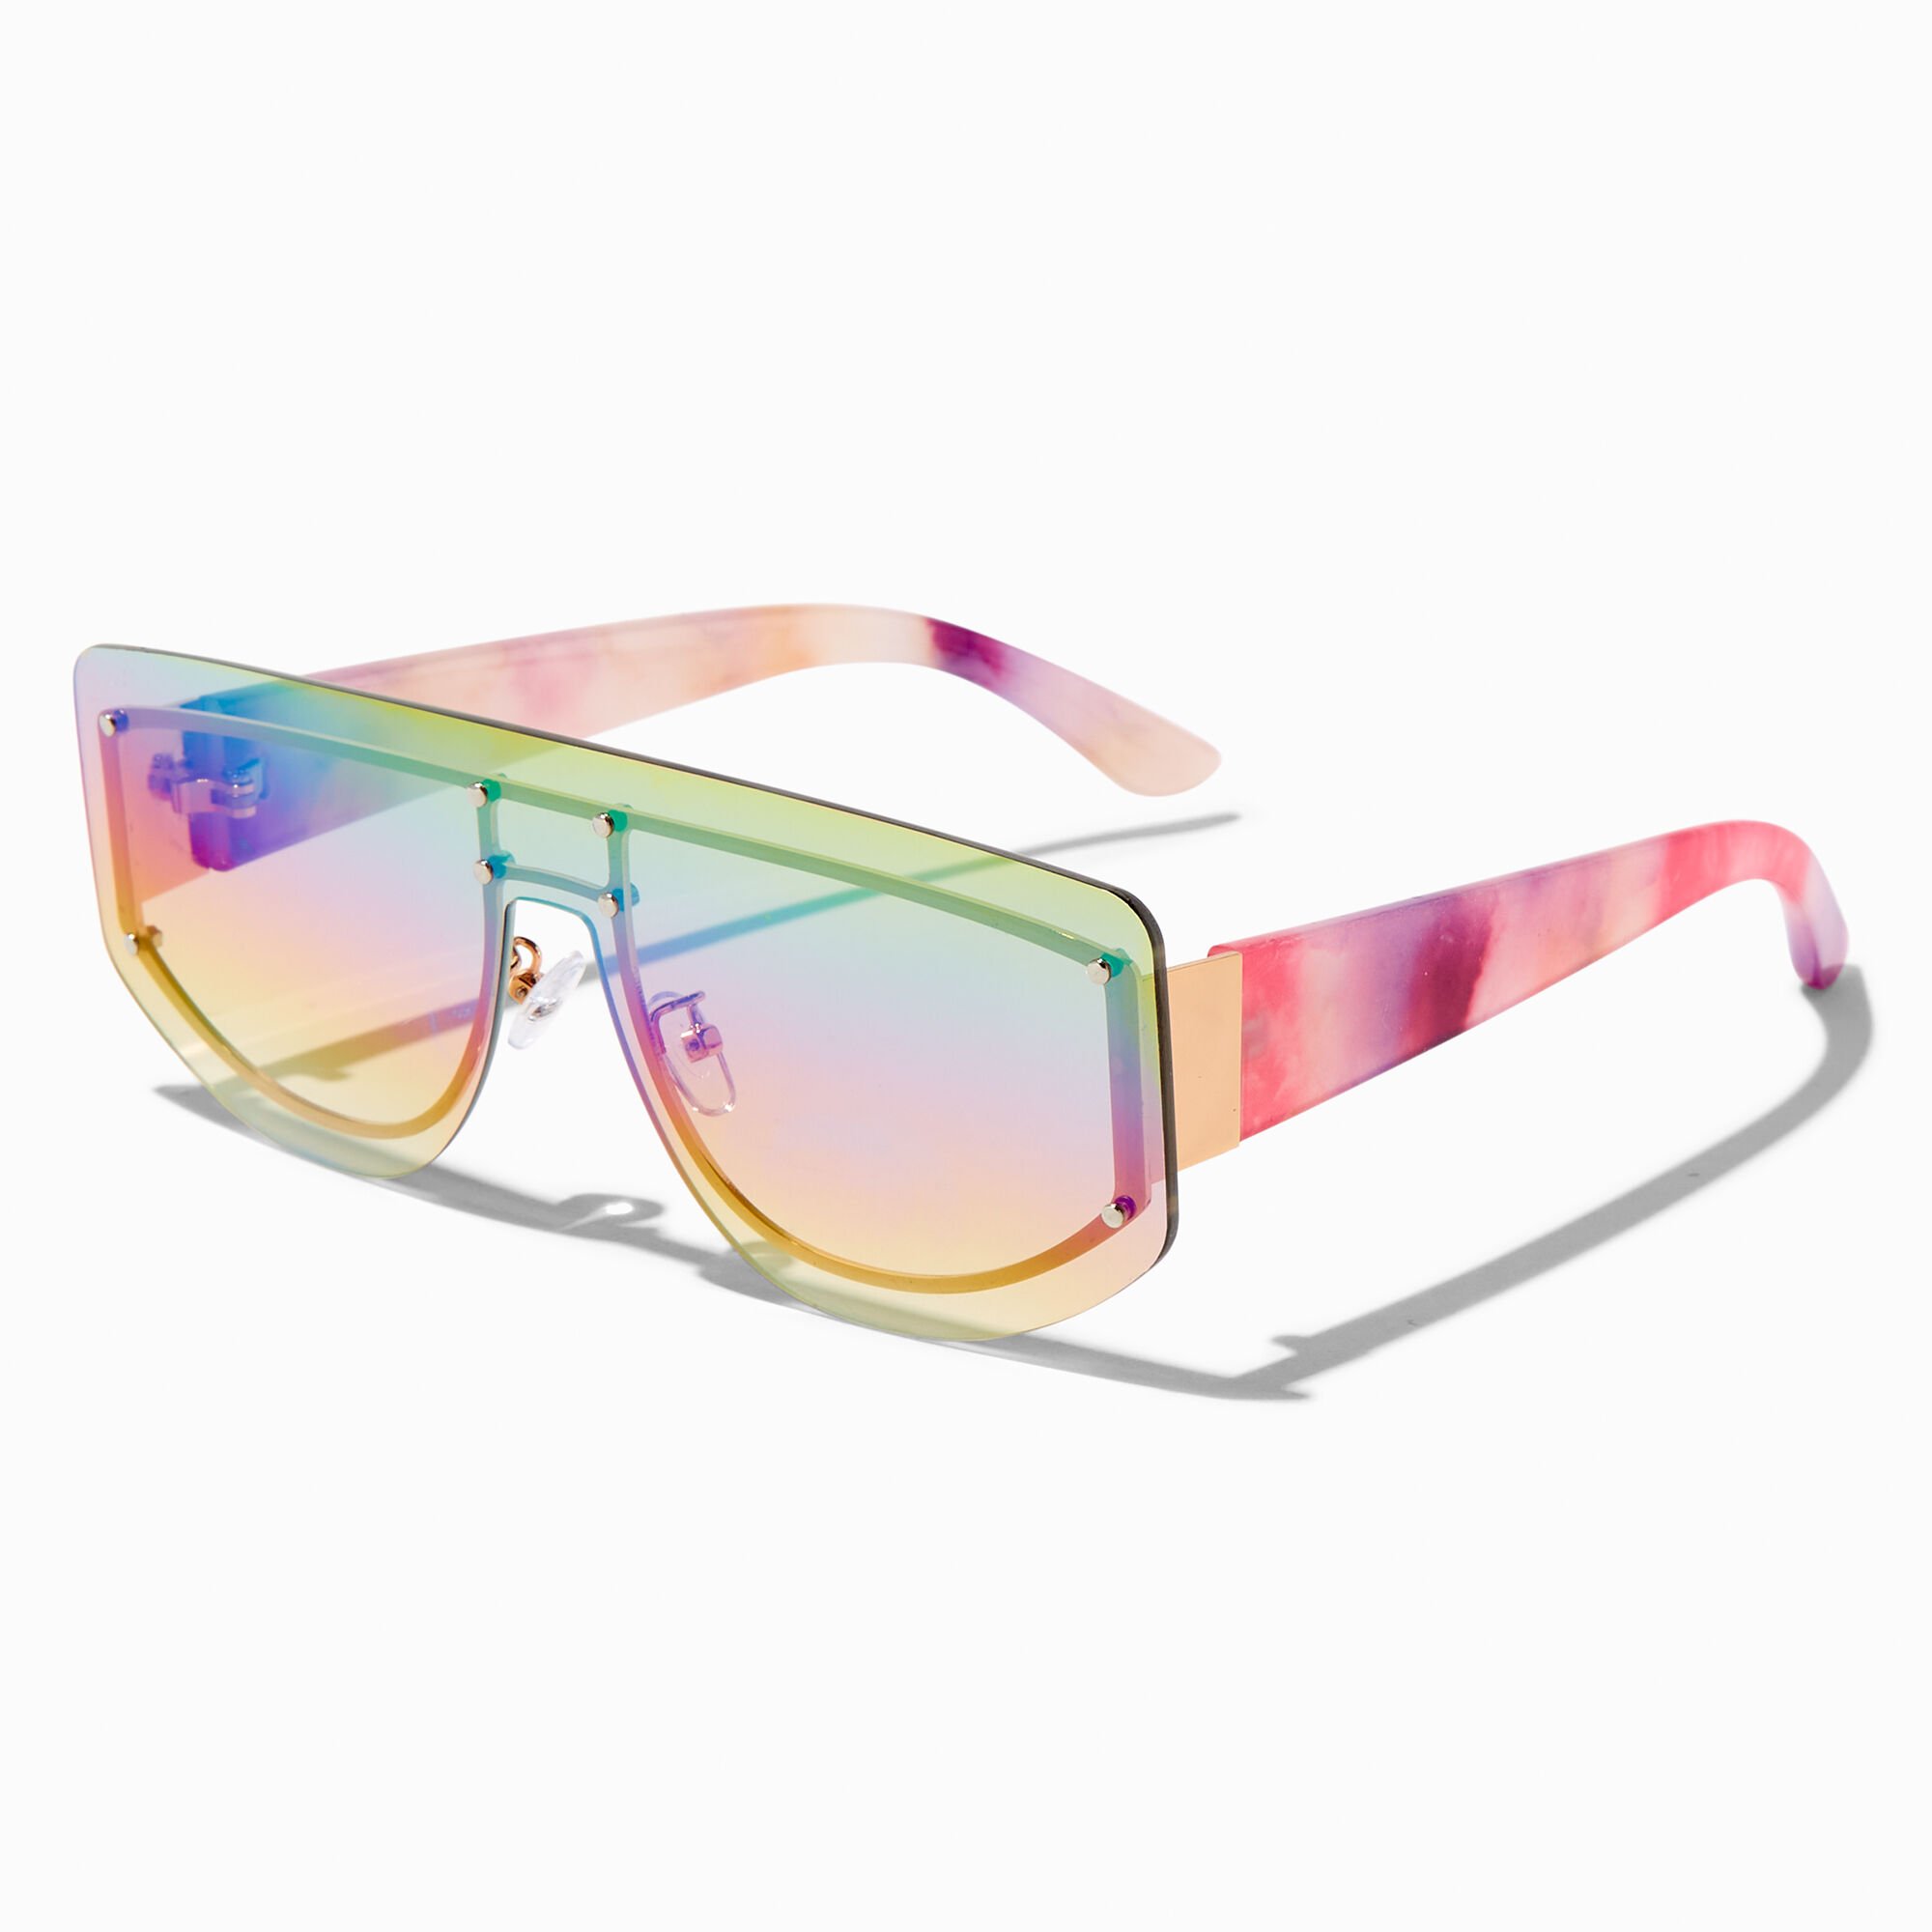 View Claires Tie Dye Faded Lens Shield Sunglasses Rainbow information